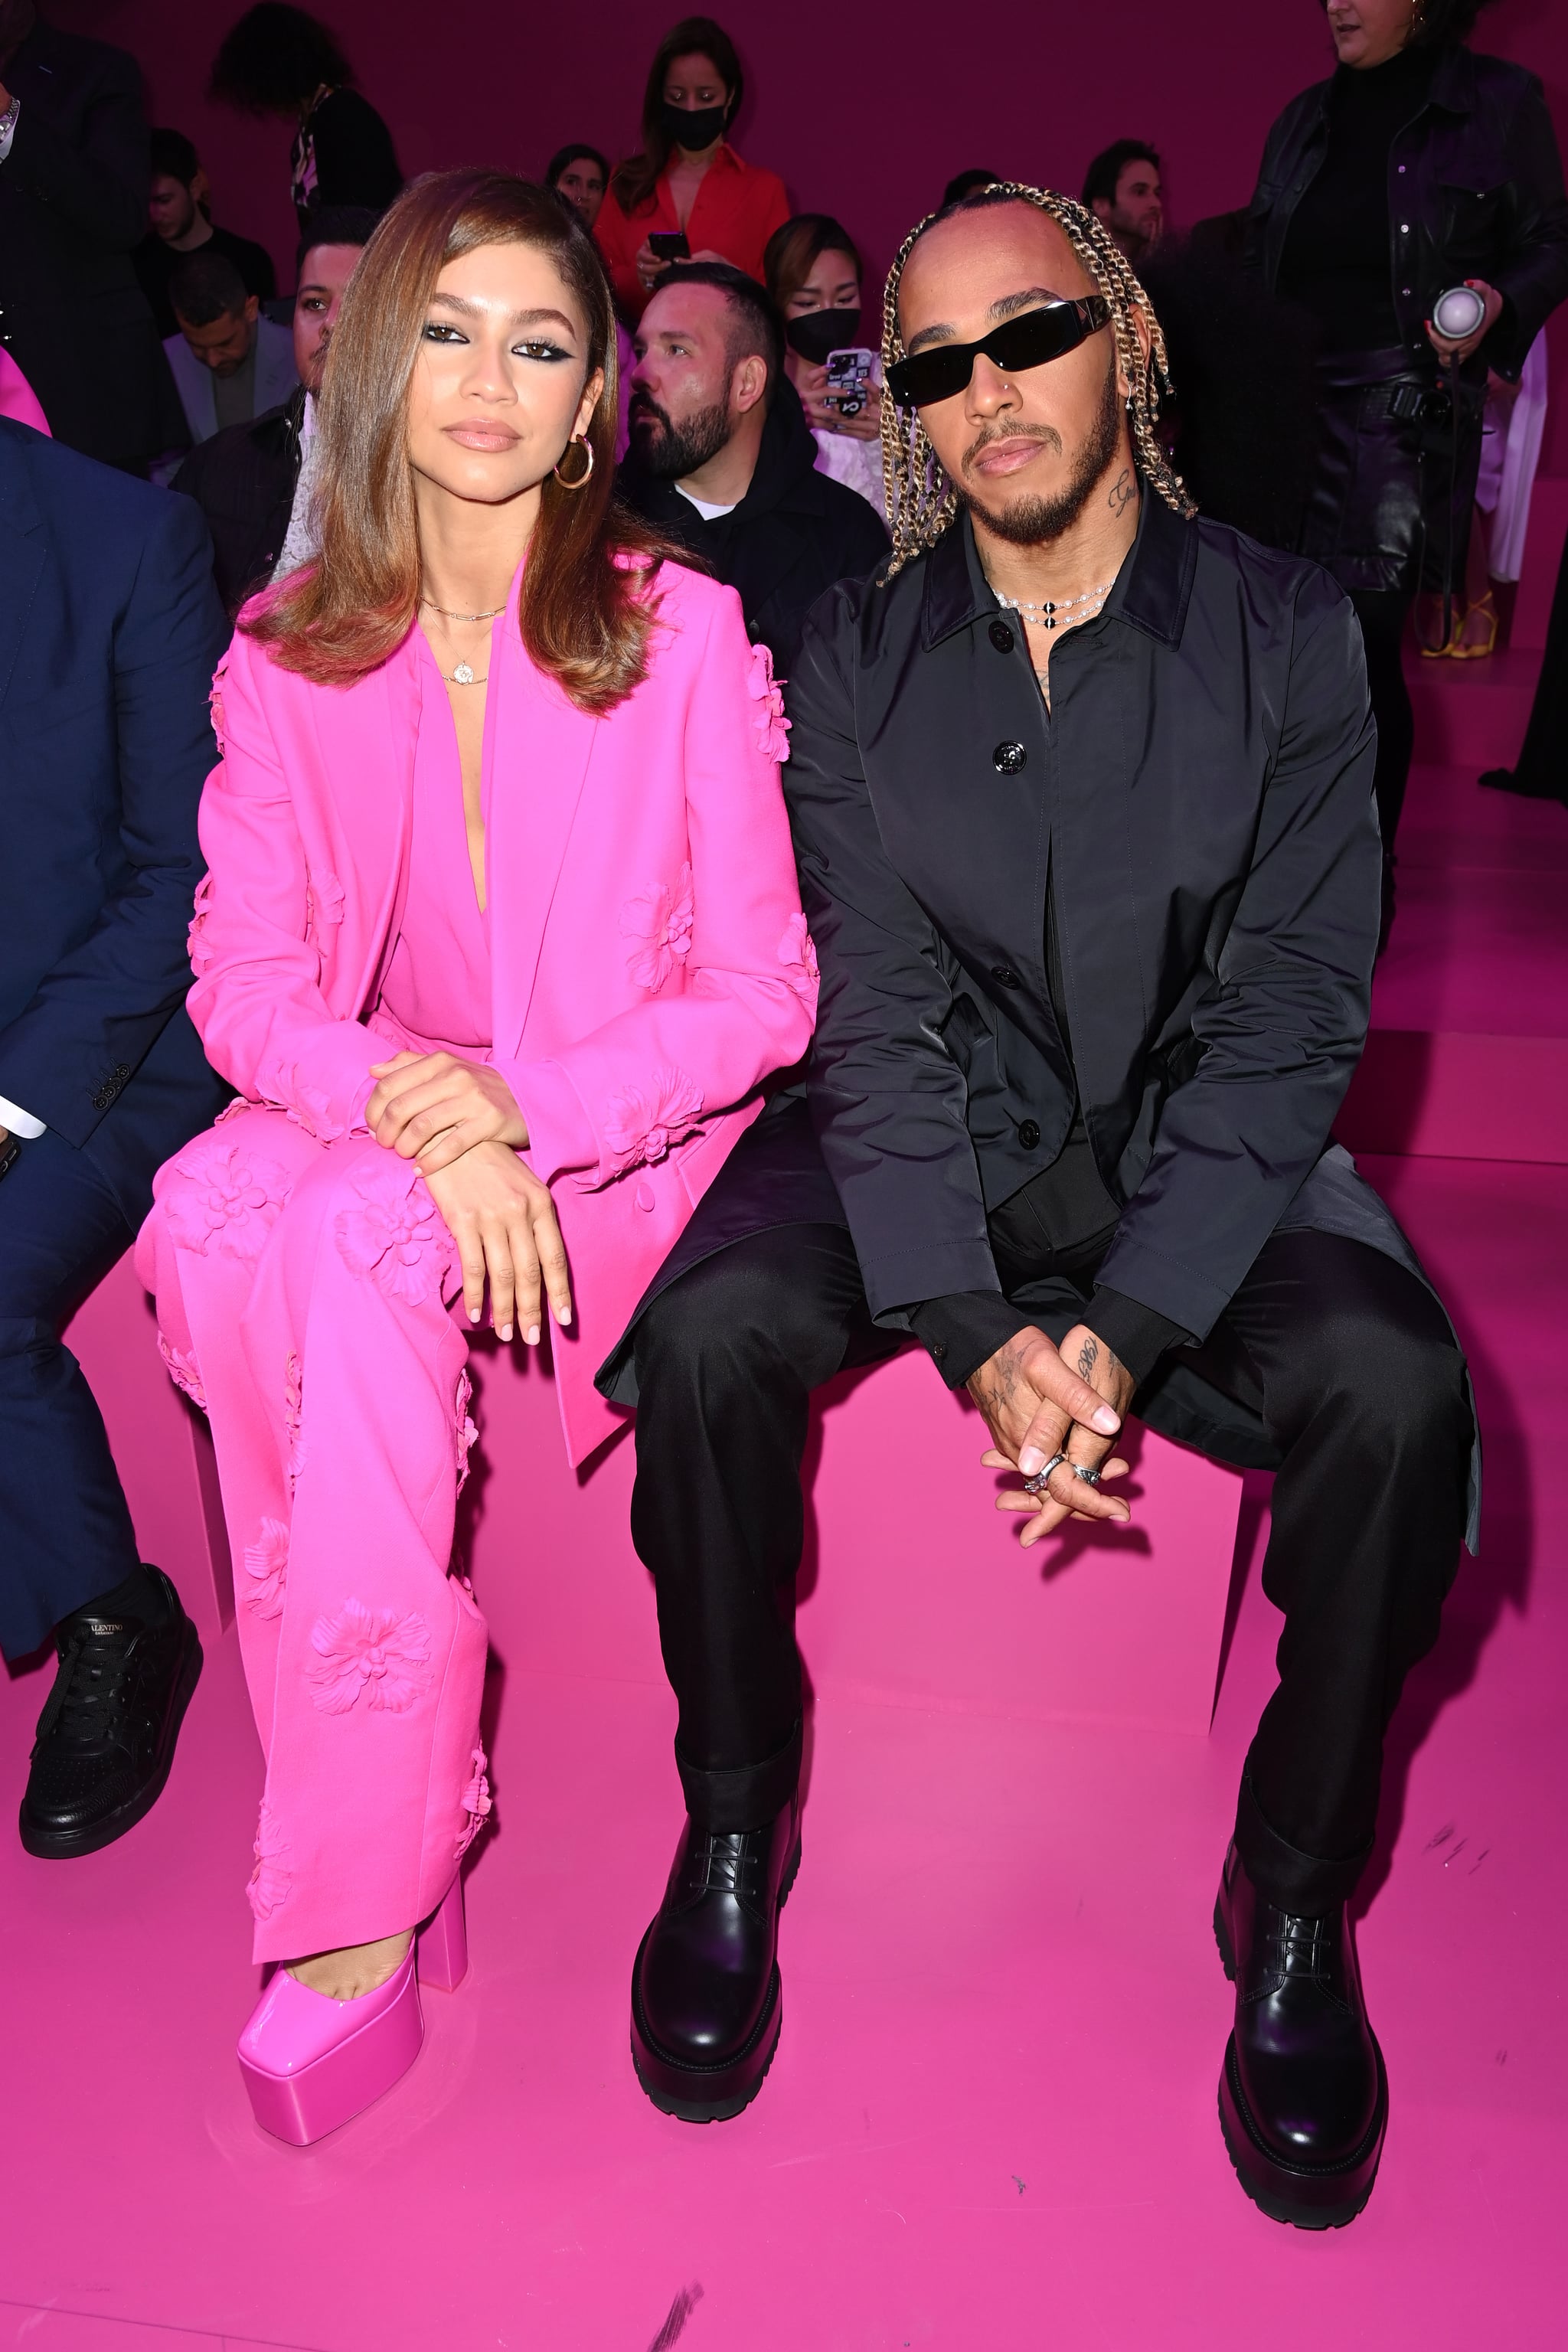 PARIS, FRANCE - MARCH 06: (EDITORIAL USE ONLY - For Non-Editorial use please seek approval from Fashion House) Zendaya and Lewis Hamilton attend the Valentino Womenswear Fall/Winter 2022/2023 show as part of Paris Fashion Week on March 06, 2022 in Paris, France. (Photo by Pascal Le Segretain/Getty Images)